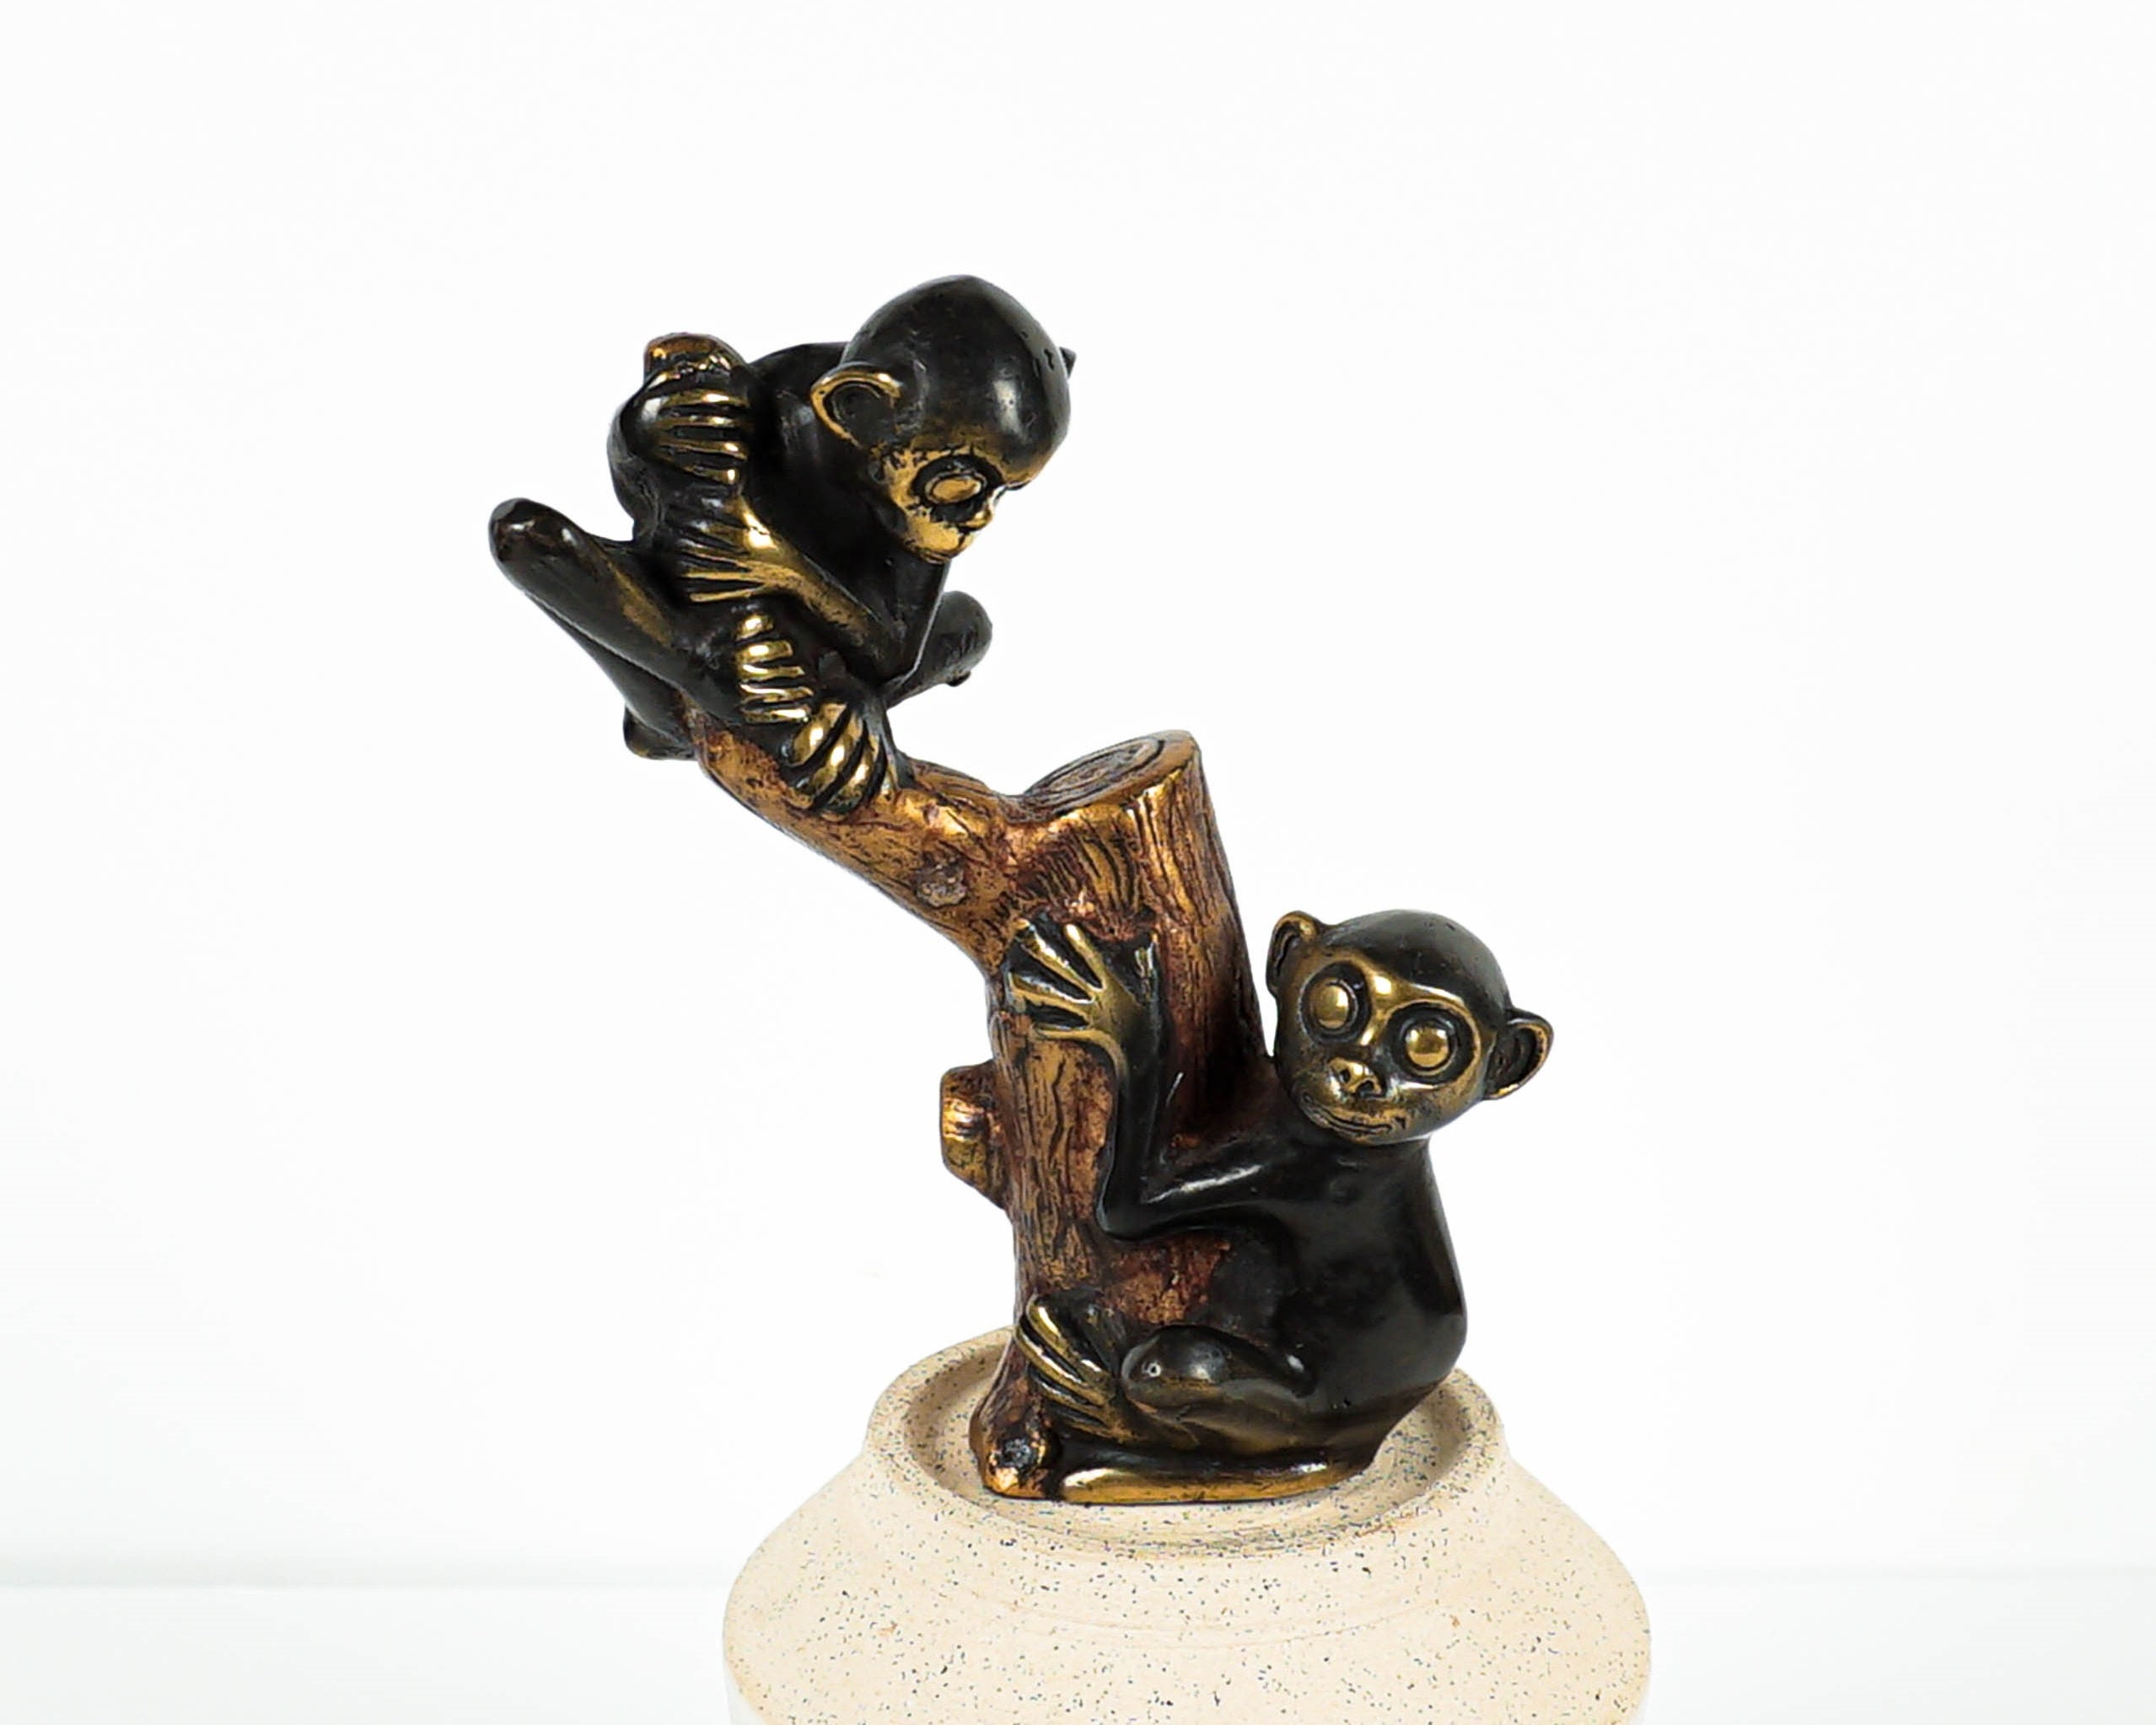 Ebros Decorative Monkey Glass Salt and Pepper Shaker Set with Holder Figurine for Tropical & African Jungle Safari Kitchen Table Decor Sculptures or Whimsical Chimp Statues As Animal Themed Gifts 